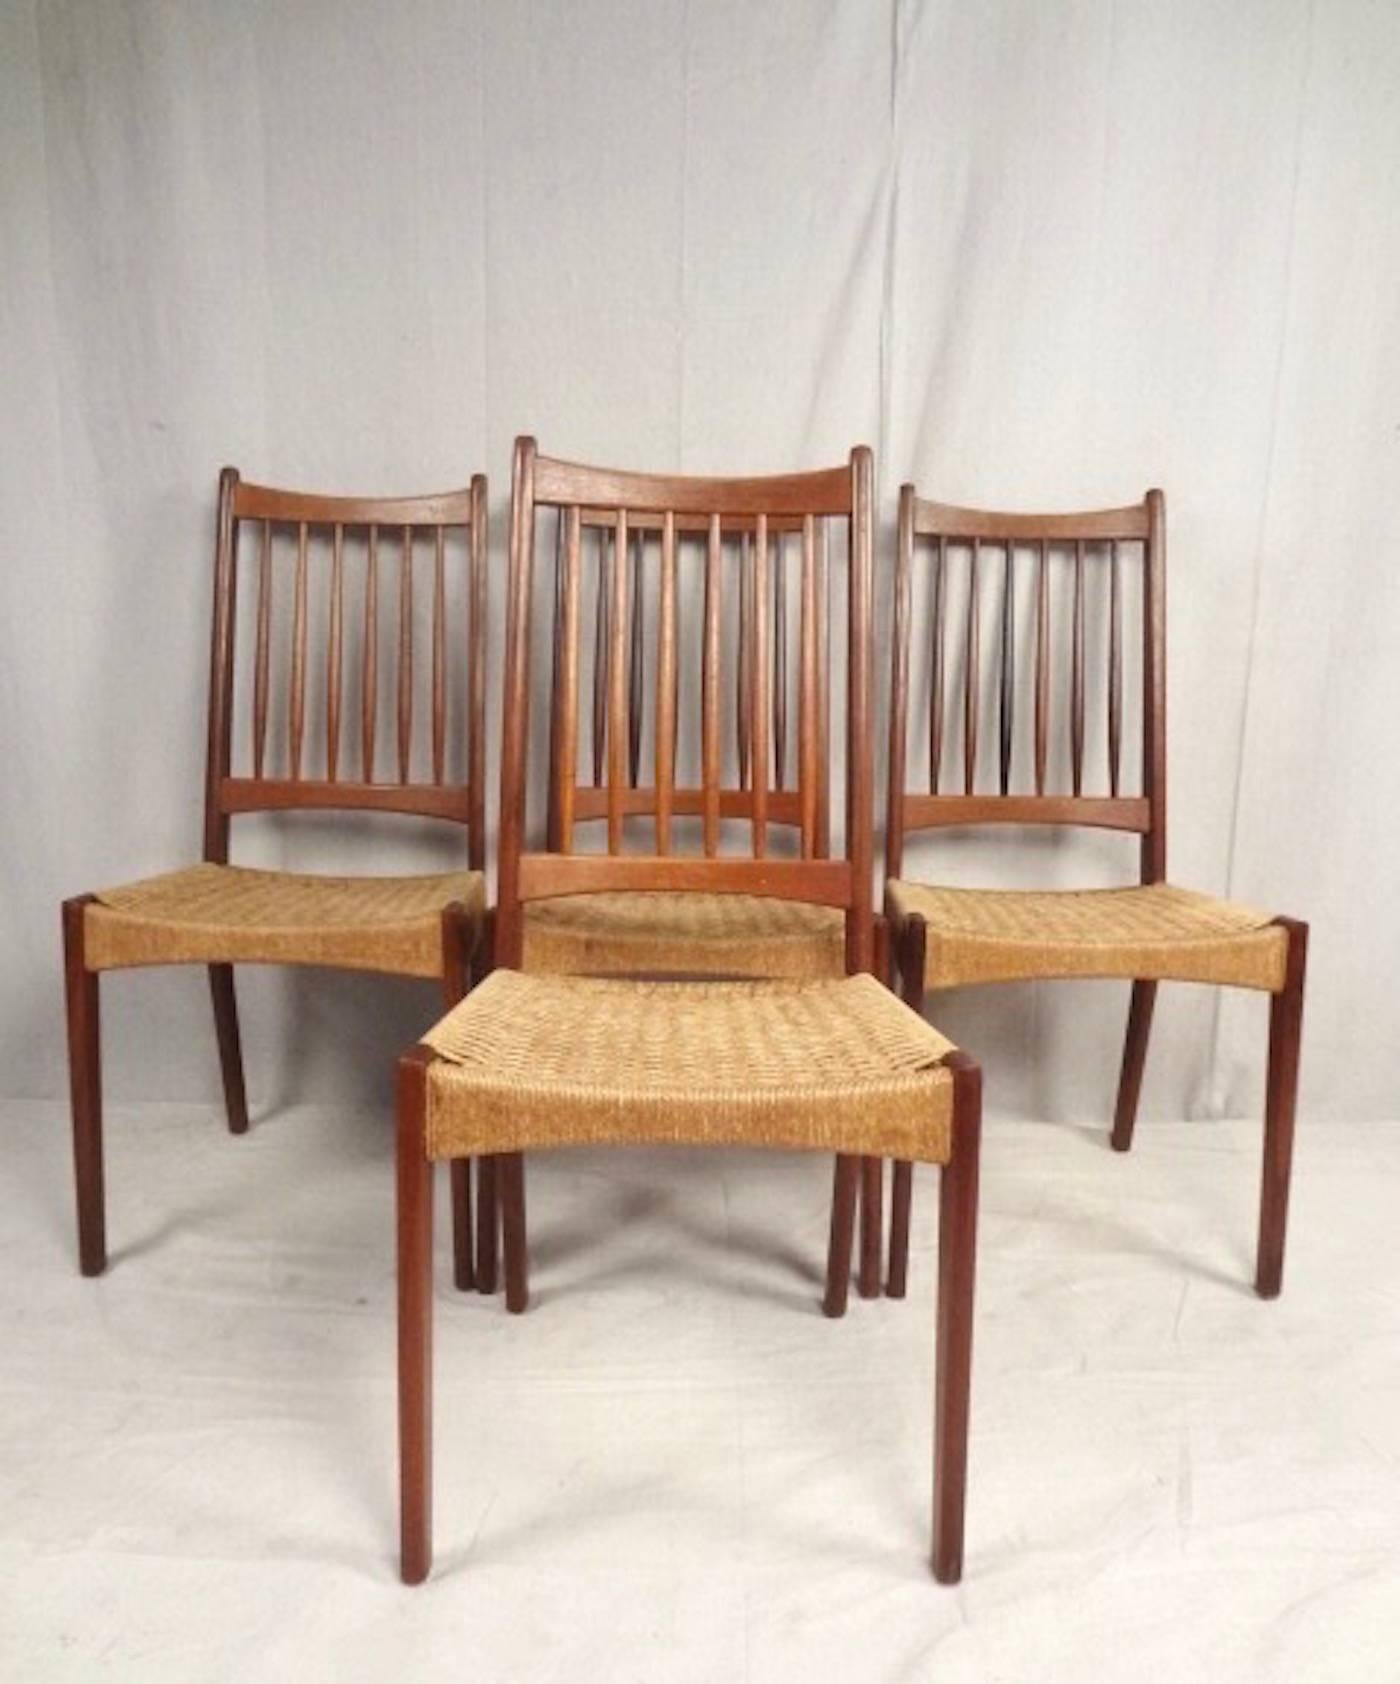 This stylish set of four spindle back dining chairs are constructed from vintage Danish teak in the style of Hans Wegner, and feature shape seat backs and rope cord seats. This beautiful matching set of Mid-Century chairs make a stylish addition to